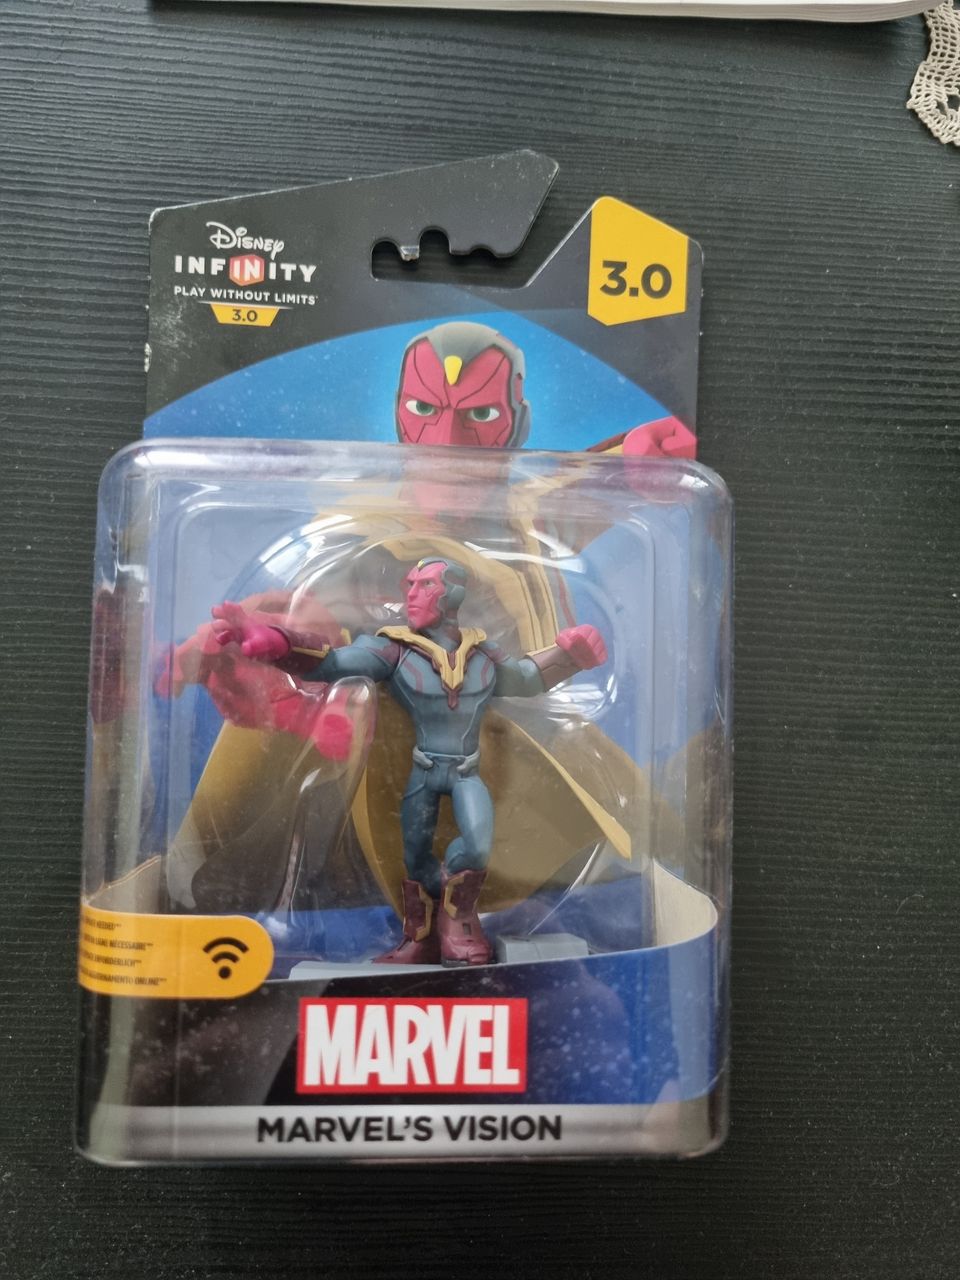 Marvel's Vision Infinity 3.0